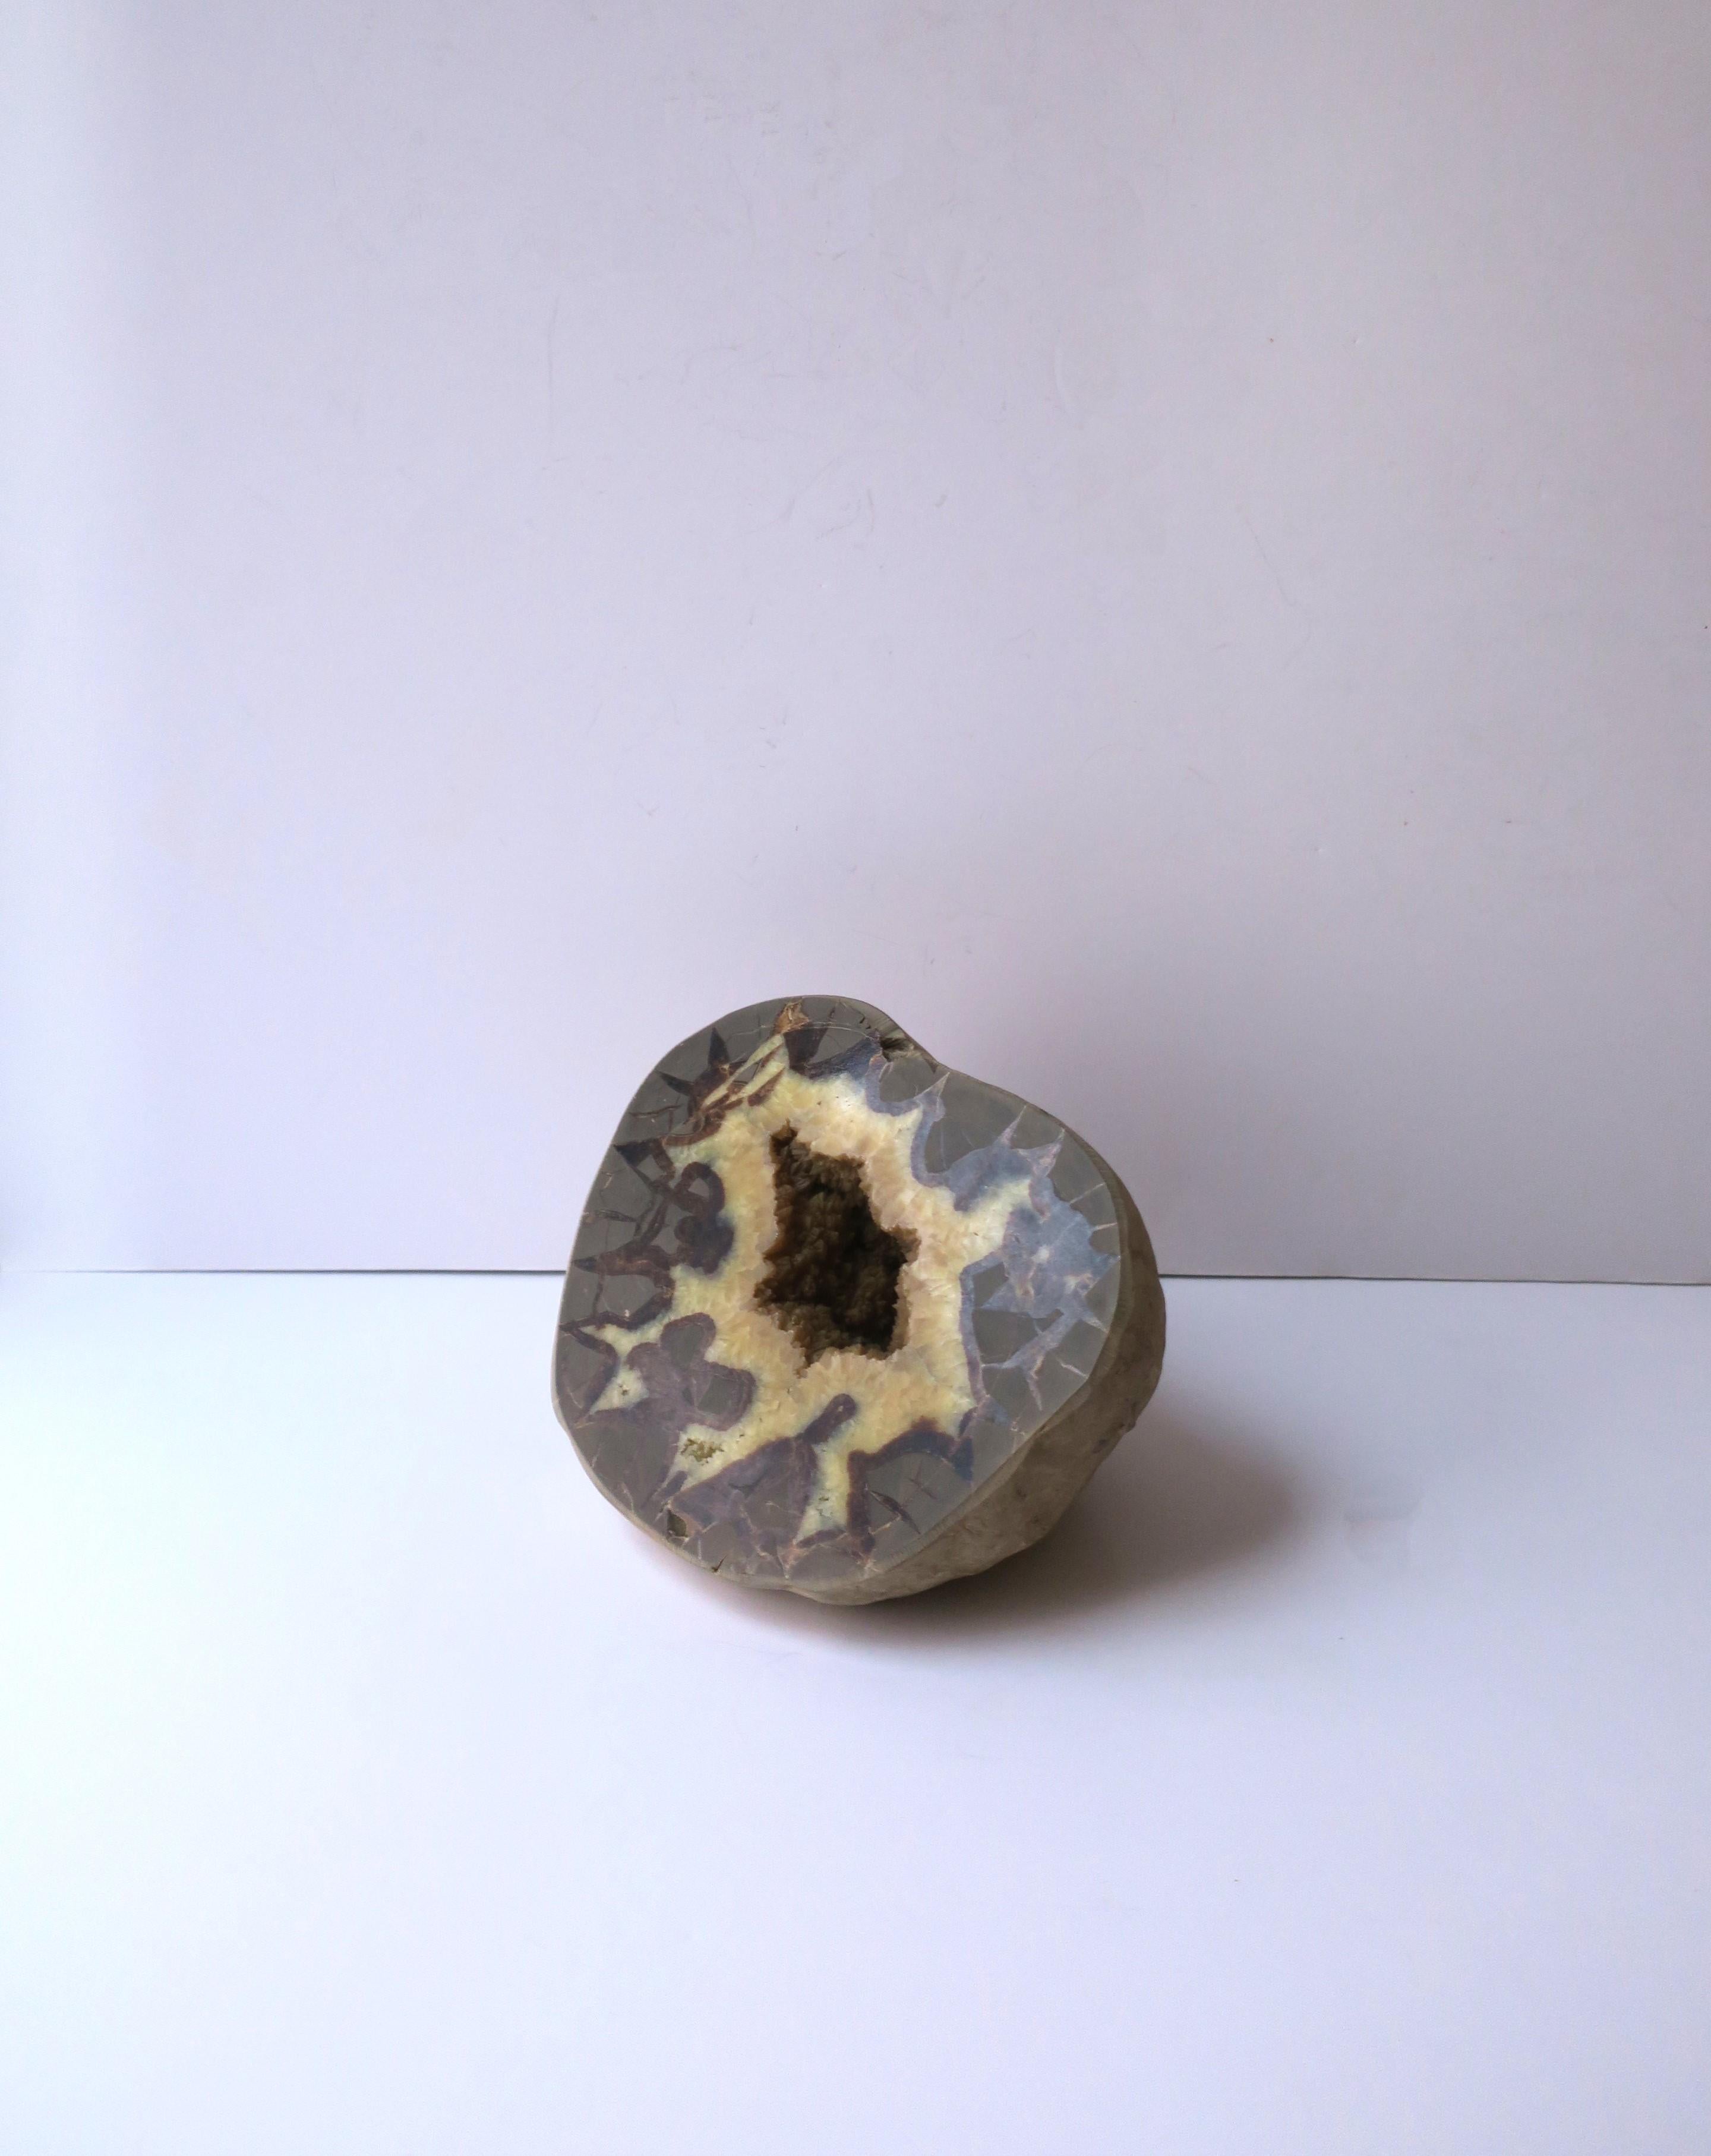 A substantial natural quartz geode specimen decorative object, Organic Modern style, circa 20th century. Colors include a puddy brownish-grey and butter hues. A great piece for an office, a library, on a bookshelf, or as a standalone decorative